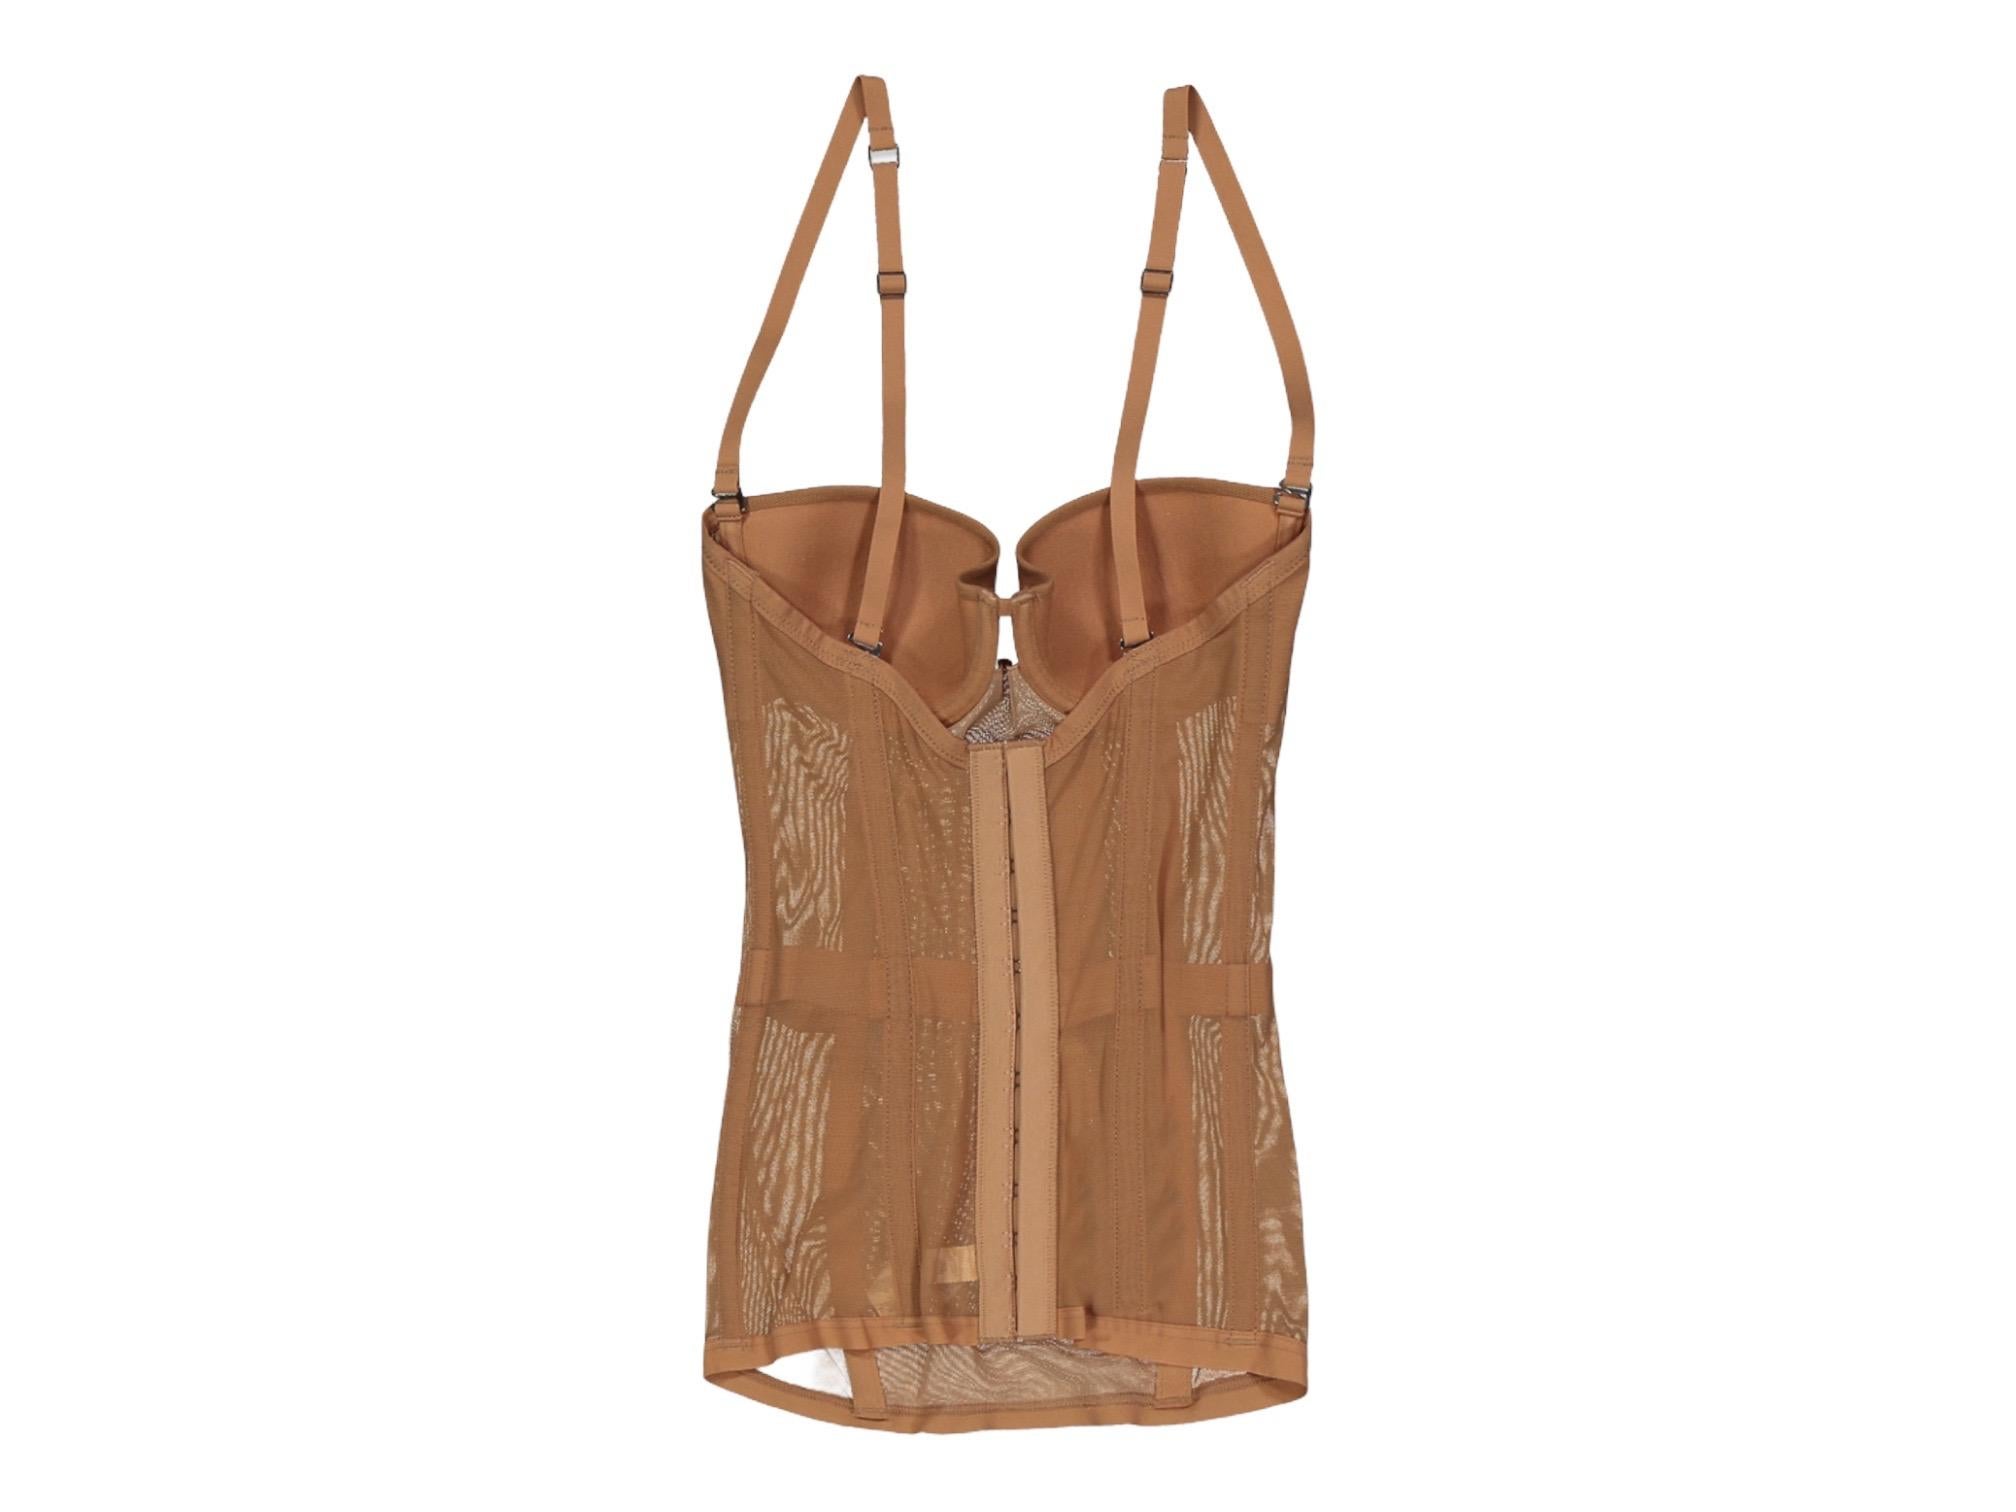 NEW LA PERLA CORSAGE CORSET TOP

WEAR THIS AMAZING CORSET WITH ANY SHEER TOP, DRESS OR UNDER A JACKET OR CARDIGAN! SO VERSATILE!

FOR A PERFECTLY SHAPED BODY

La Perla Tulle bustier creates a smooth silhouette.
The combined effect of smooth tulle